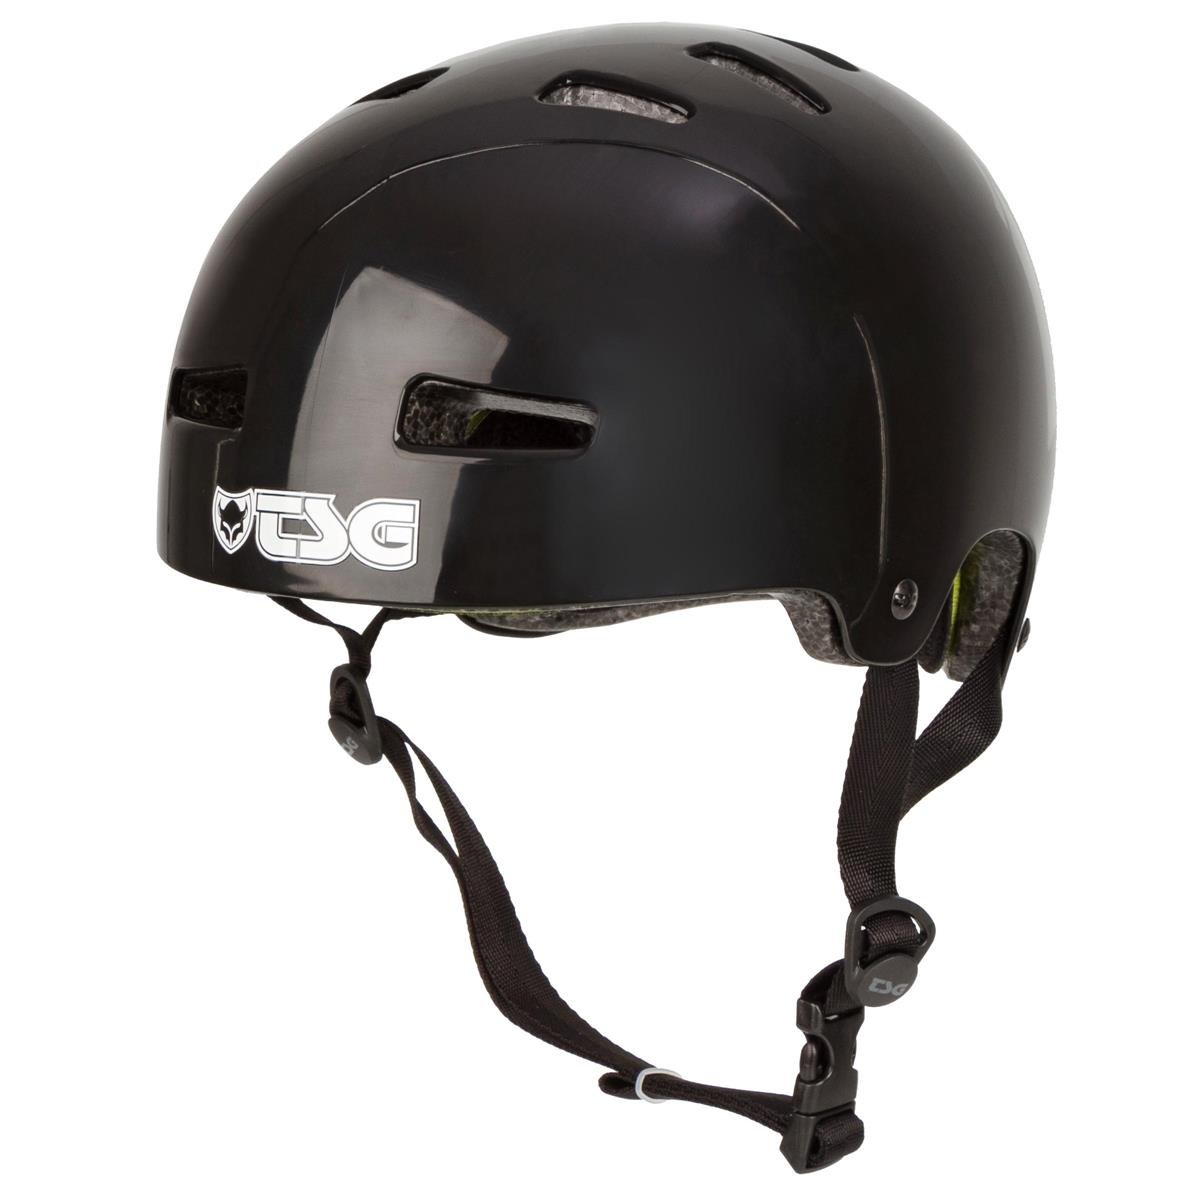 TSG Casco BMX/Dirt Evolution Injected Color - Injected Black